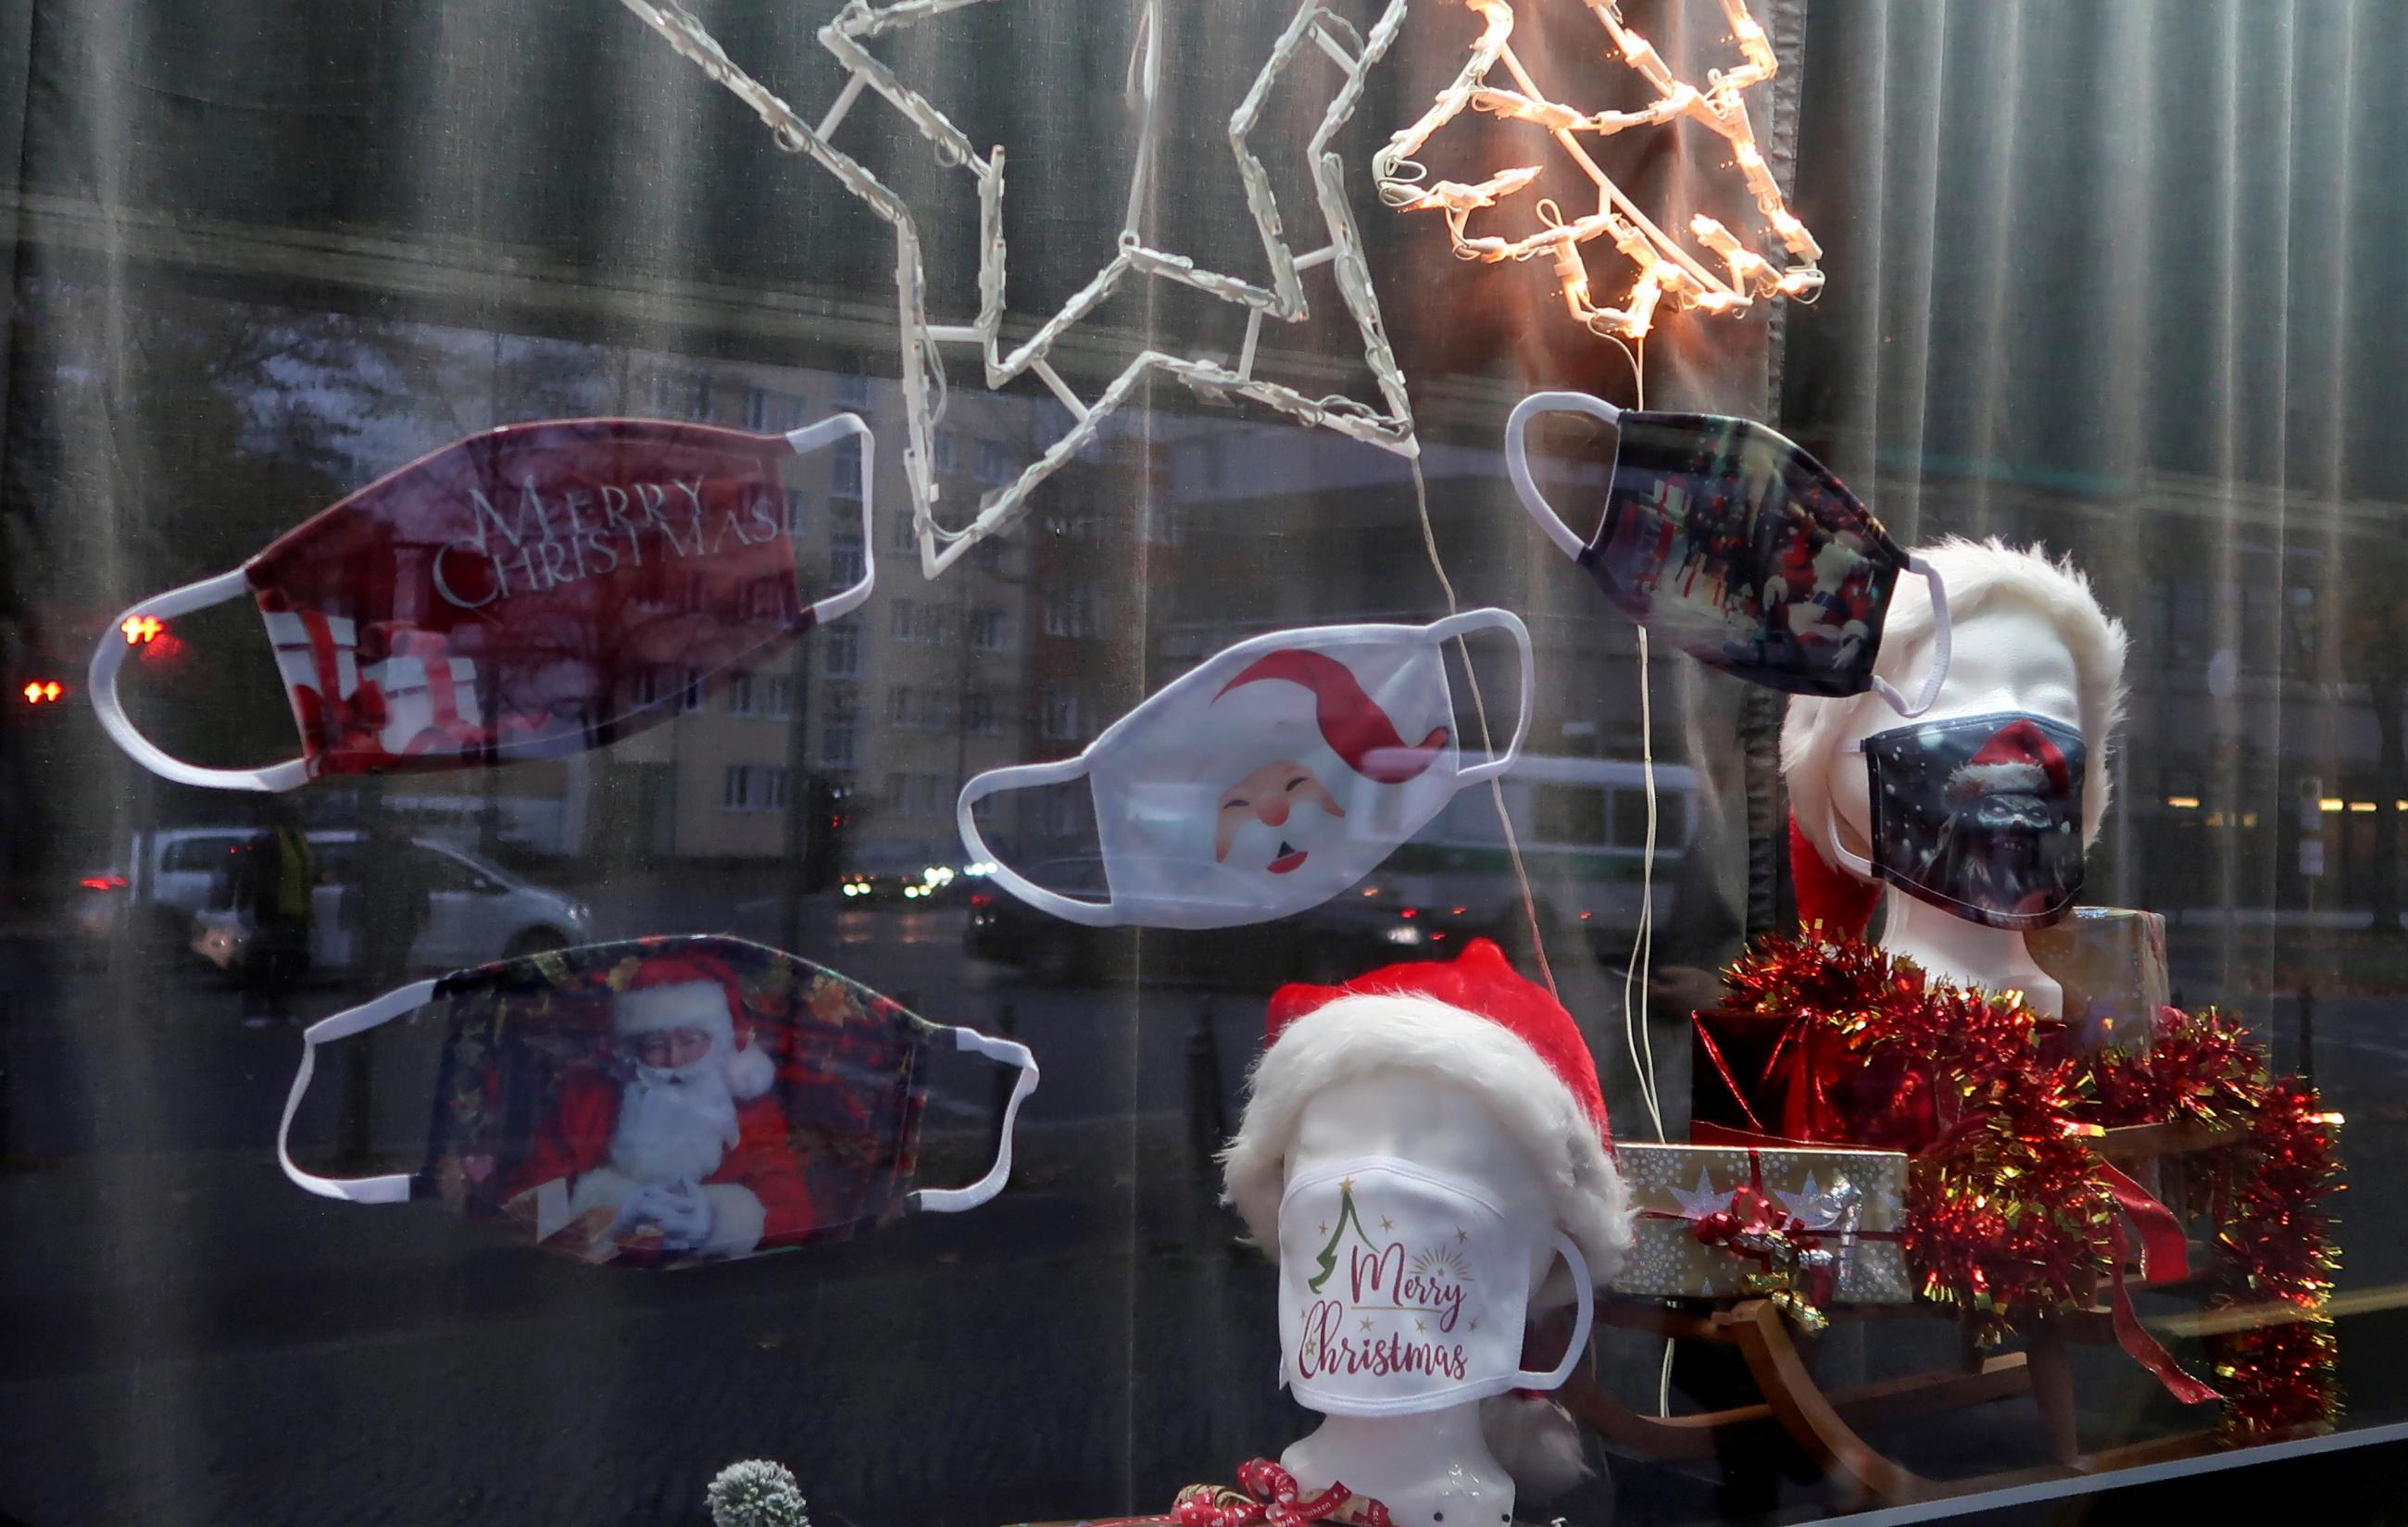 Face masks on sale are pictured as Christmas decoration at a photography studio's window, as the spread of the coronavirus disease (COVID-19) continues, in Berlin, Germany, November 11, 2020.